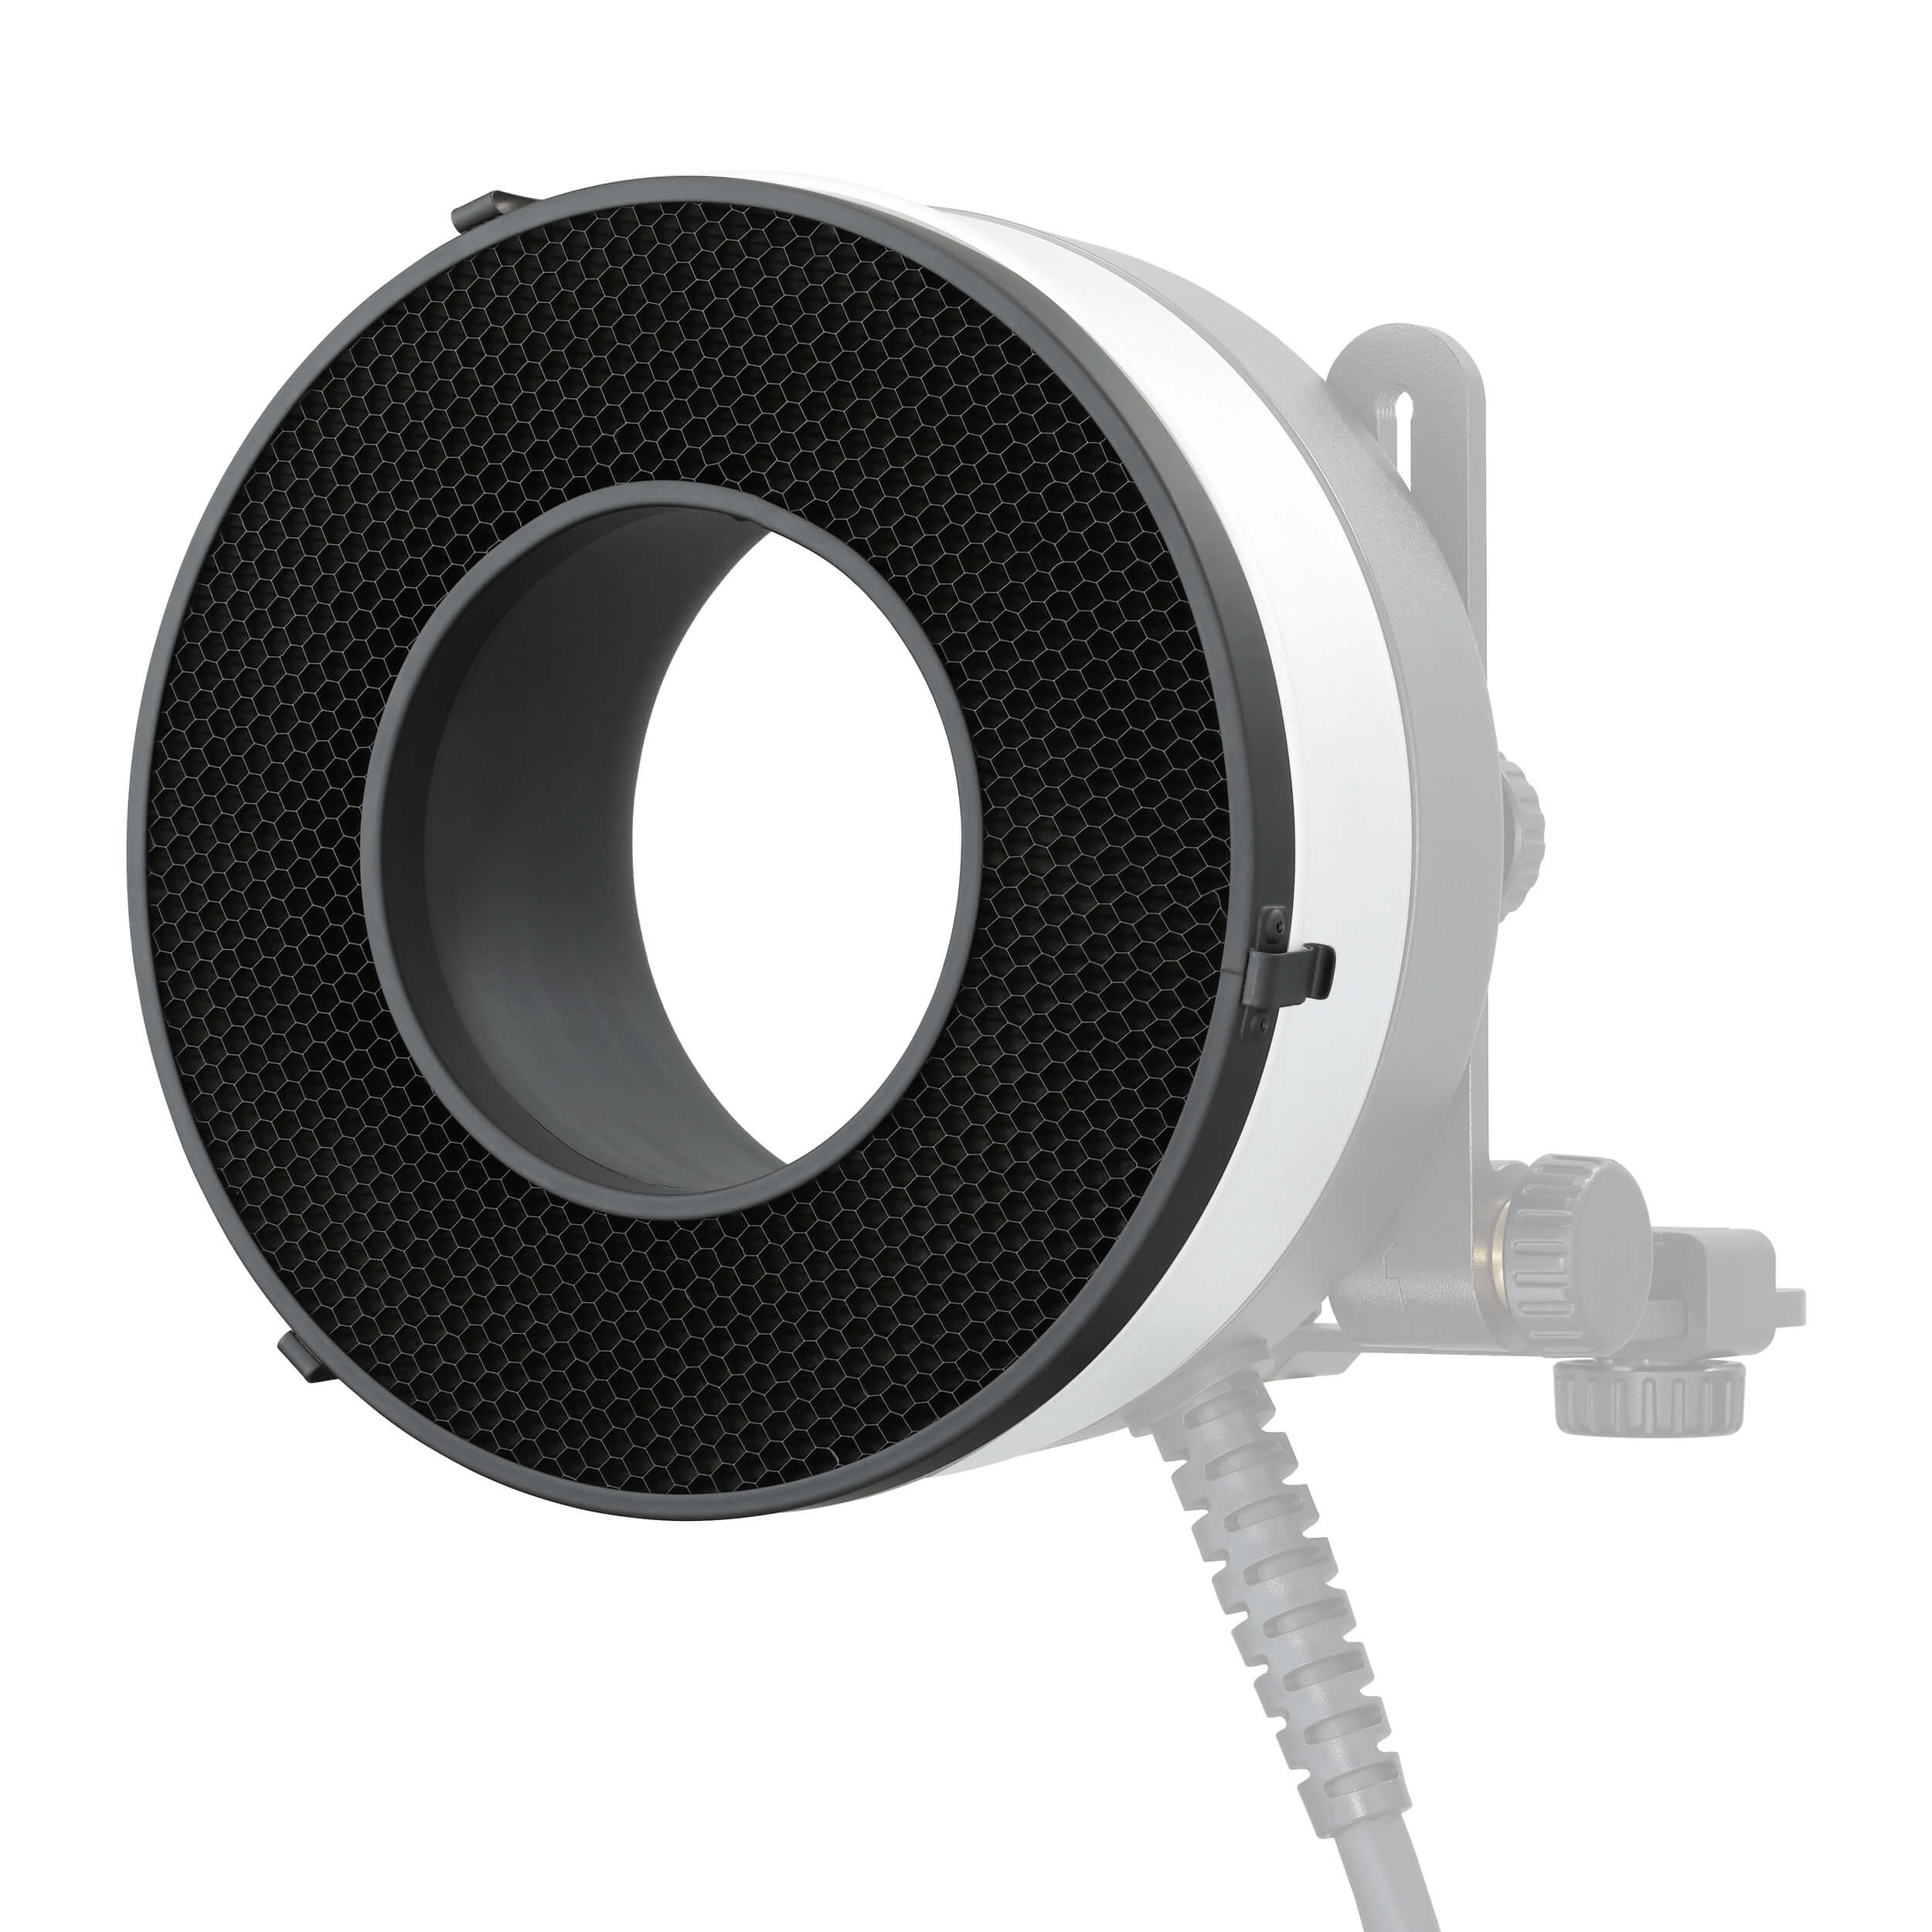 BD-09 Series Honeycomb Grids For R1200 And R2400 Ring Flash Heads